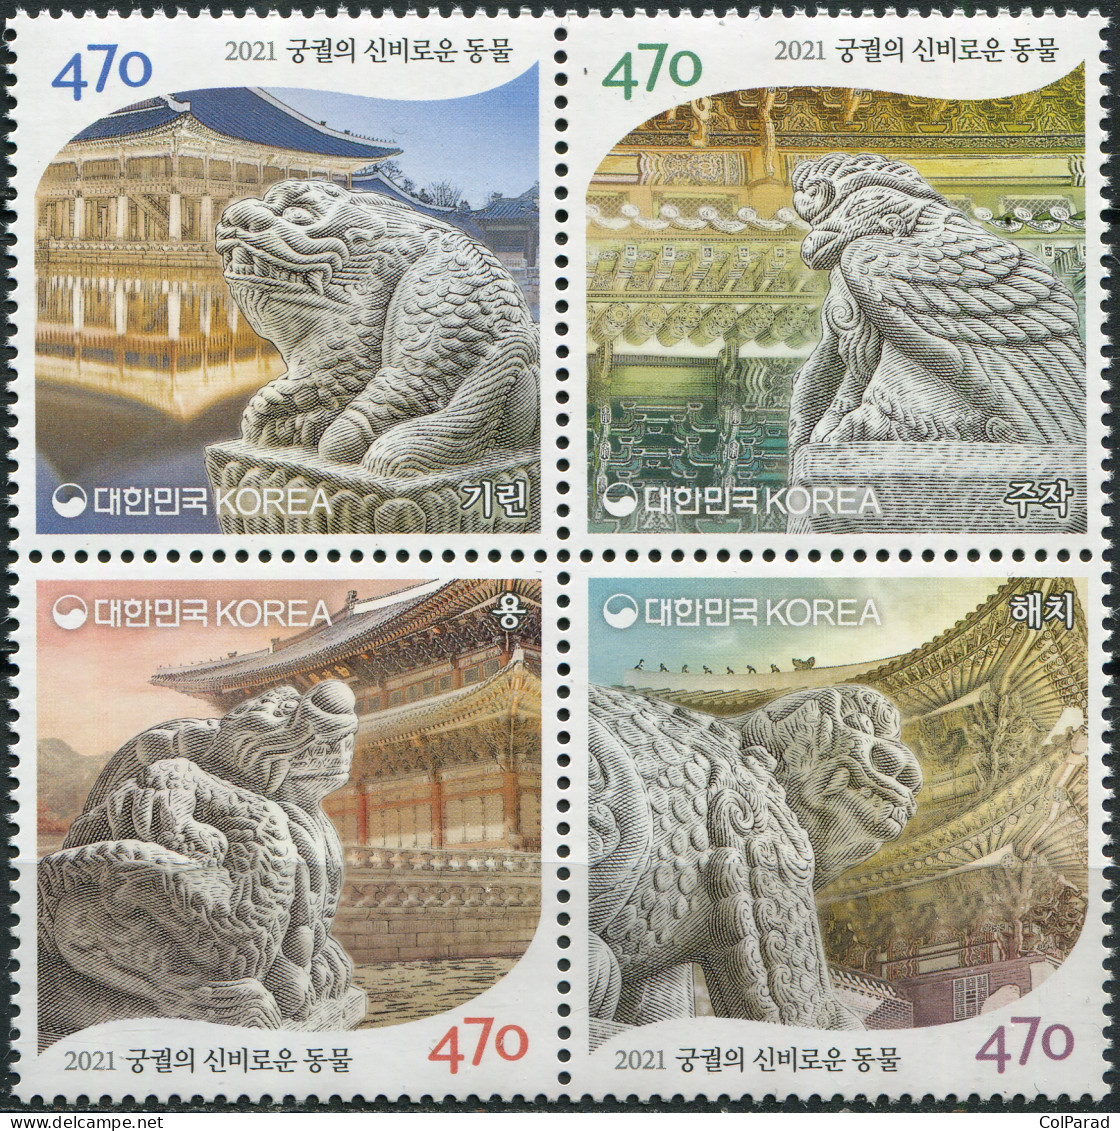 SOUTH KOREA - 2021 - BLOCK OF 4 STAMPS MNH ** - Statues Of Mythical Creatures - Korea, South